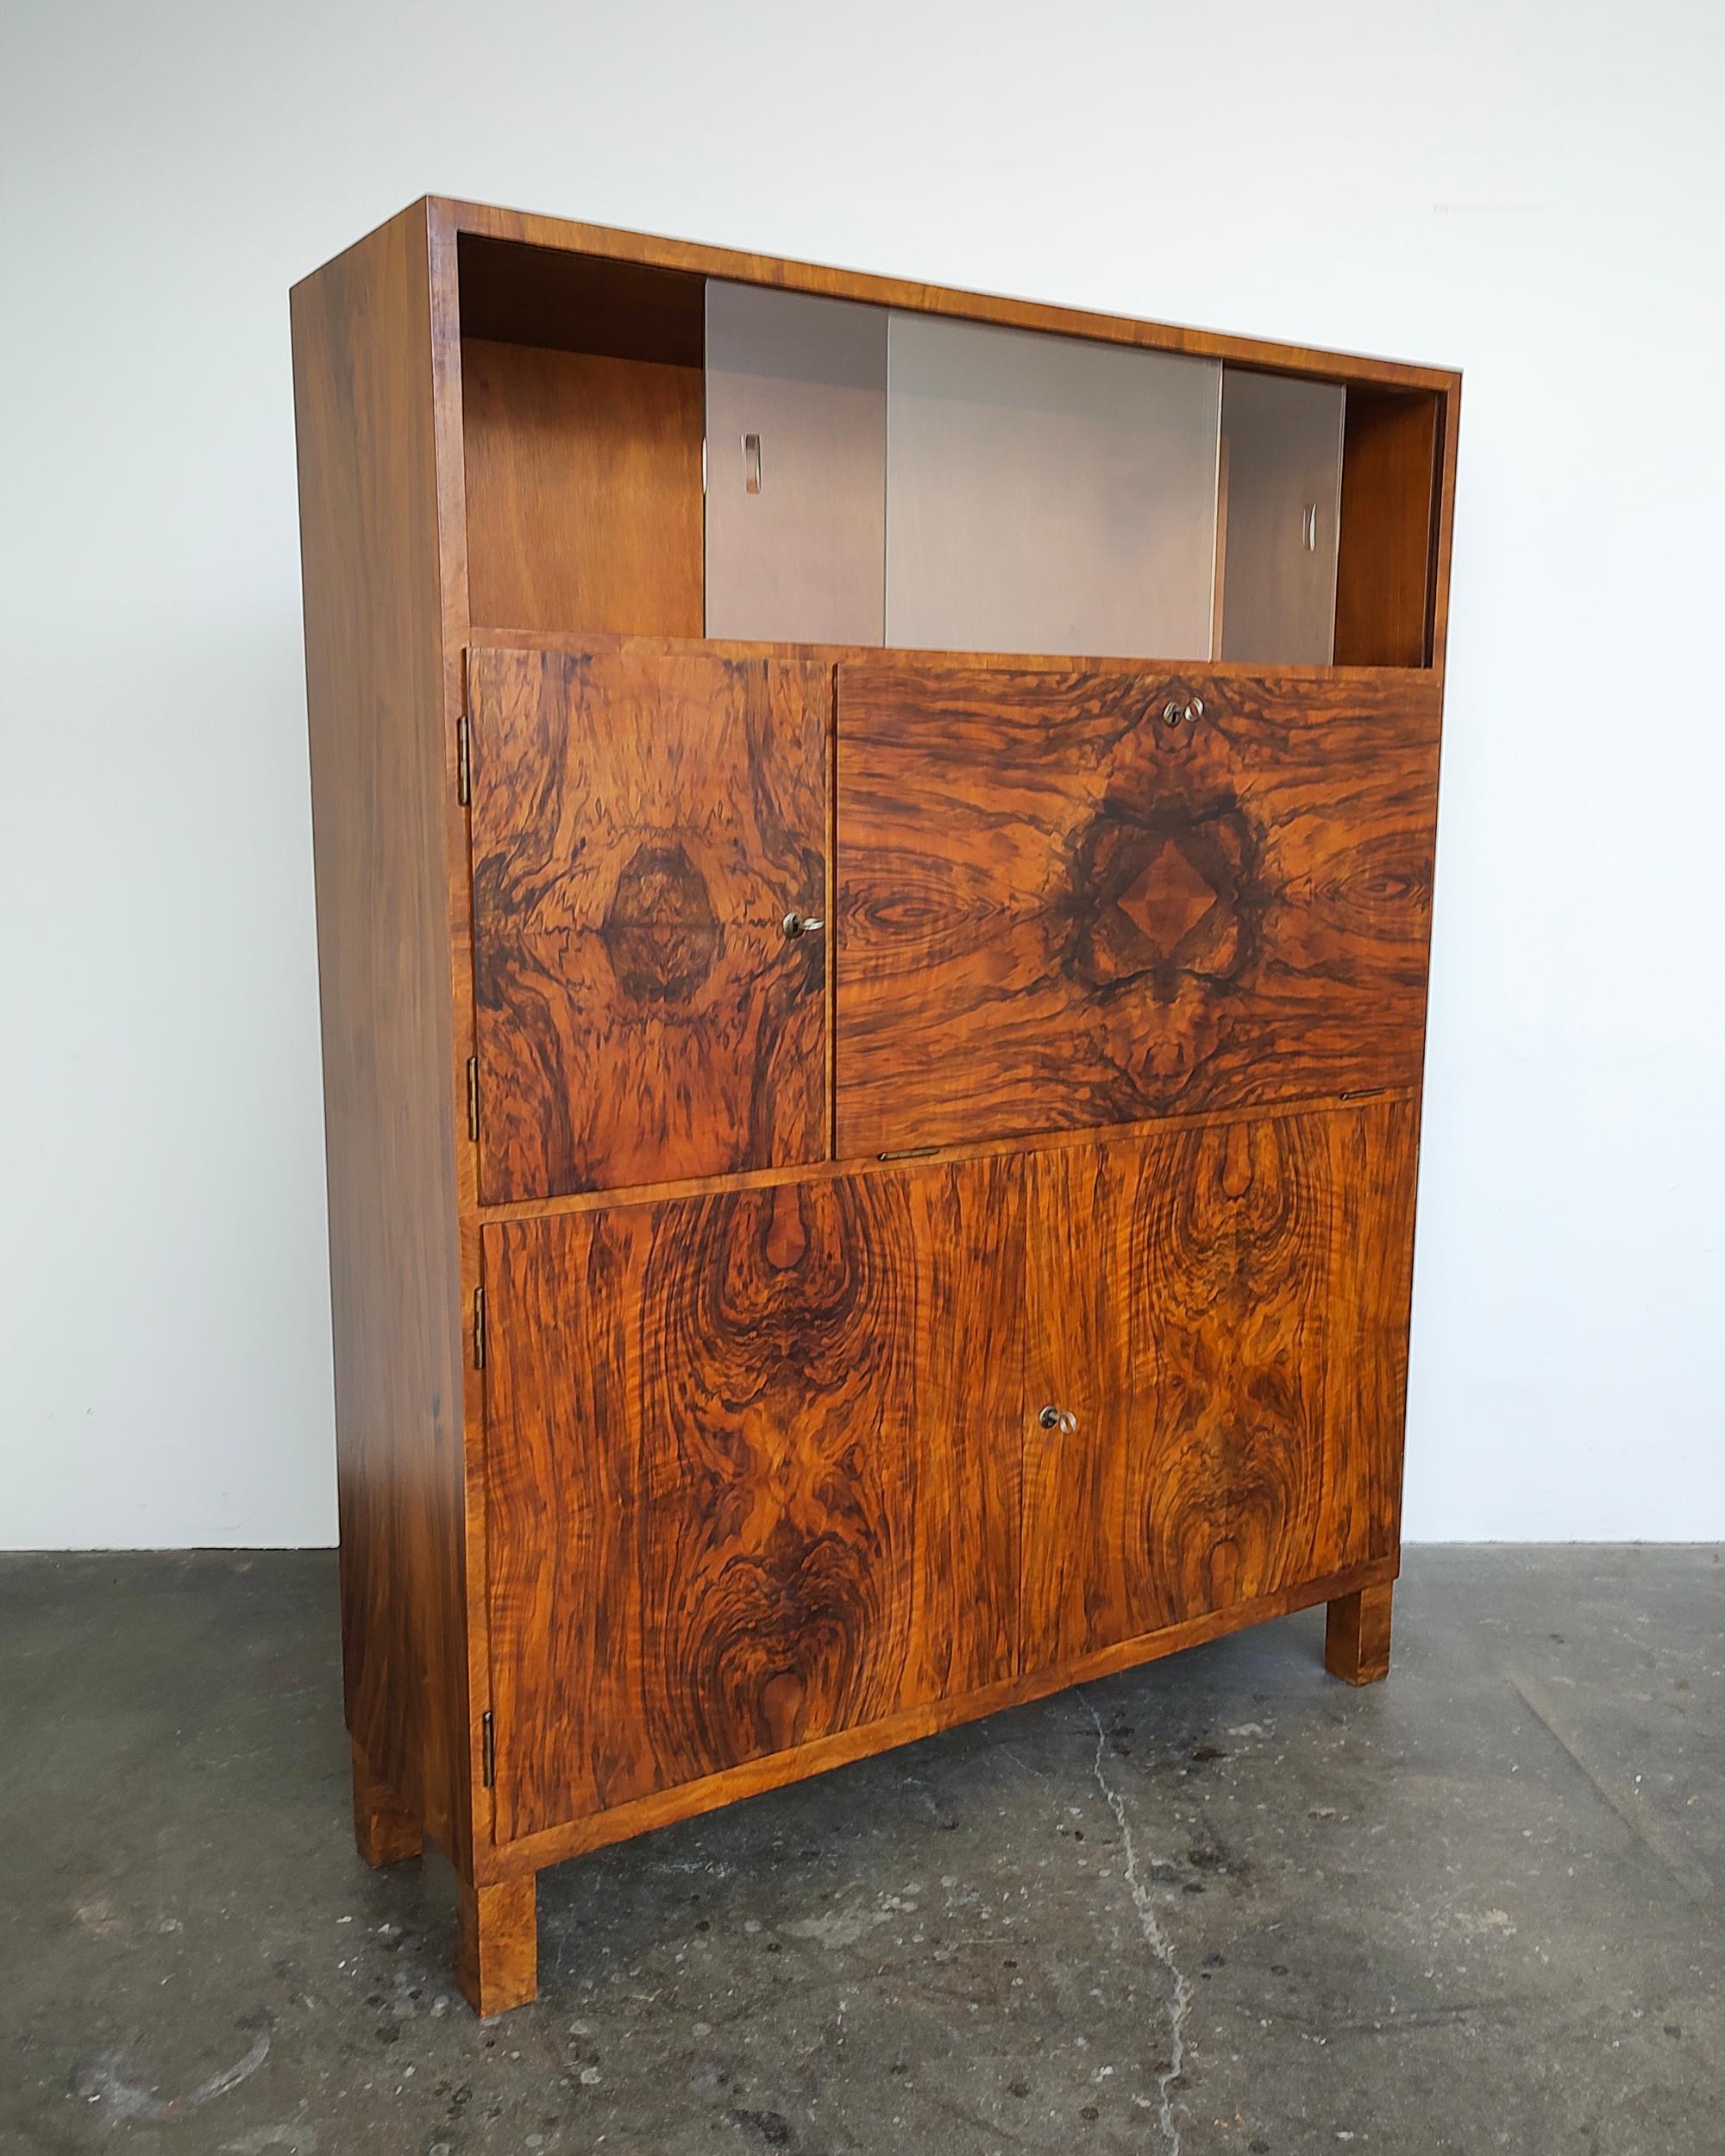 Walnut burl wood Swiss bar cabinet circa 1930-1940. Gorgeous wood grain covering all cabinet faces. Upper area features sliding glass doors with recessed pulls. Fold-down locking cabinet middle right with two small drawers inside. Middle locking